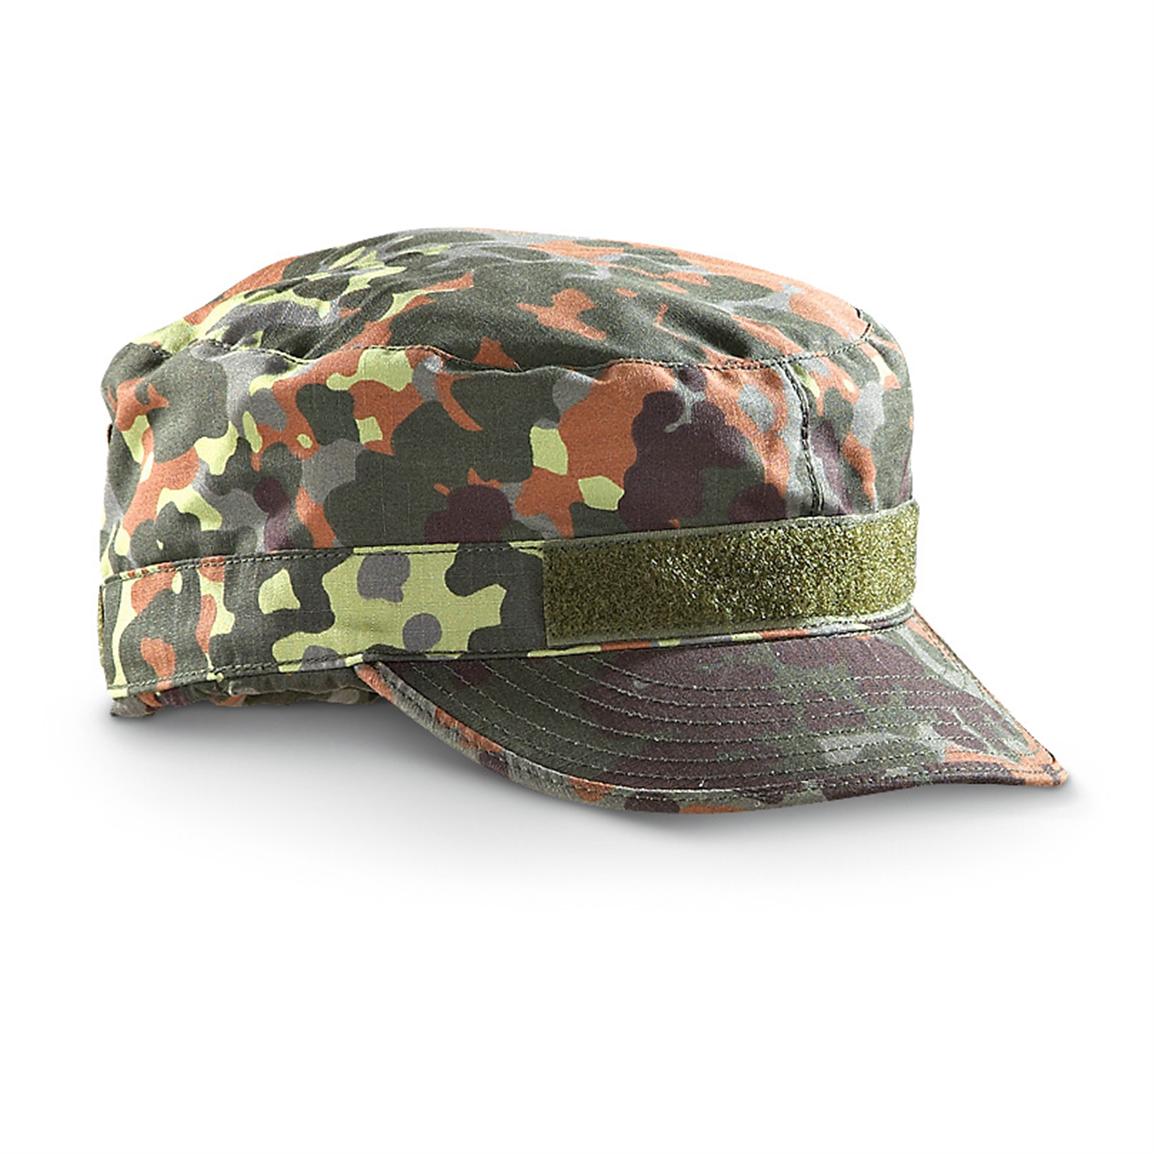 Military Style Tac Gear Hat German Fleck Camo 219366 Military Hats